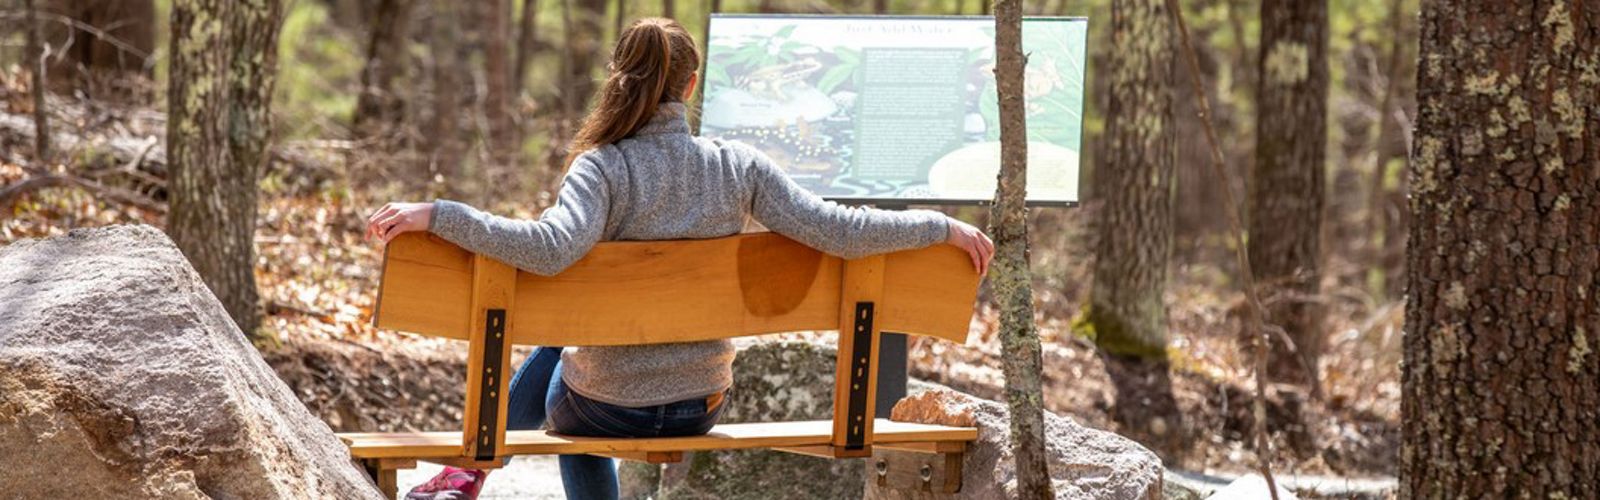 View from behind of a woman resting on a bench in the forest and looking at an informational sign.